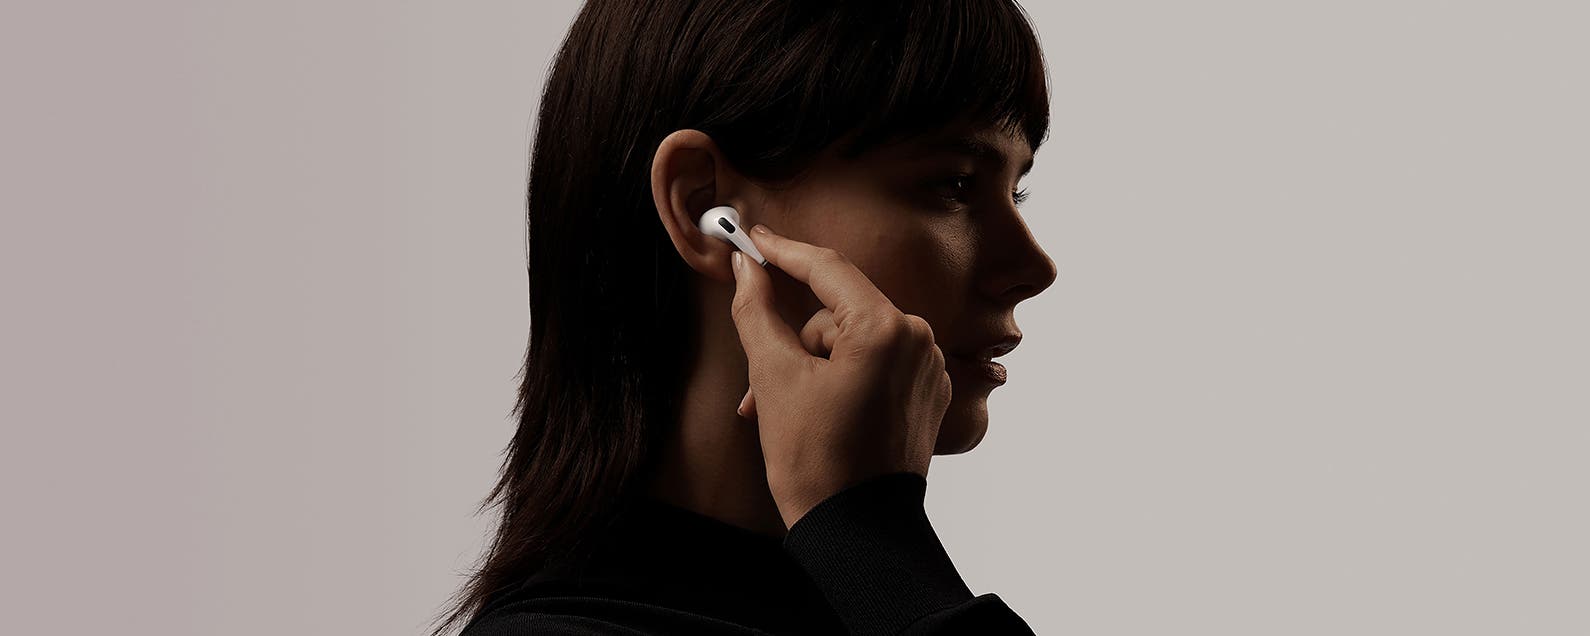 skære ned auroch Profeti Are Apple AirPods Waterproof? Everything You Need to Know